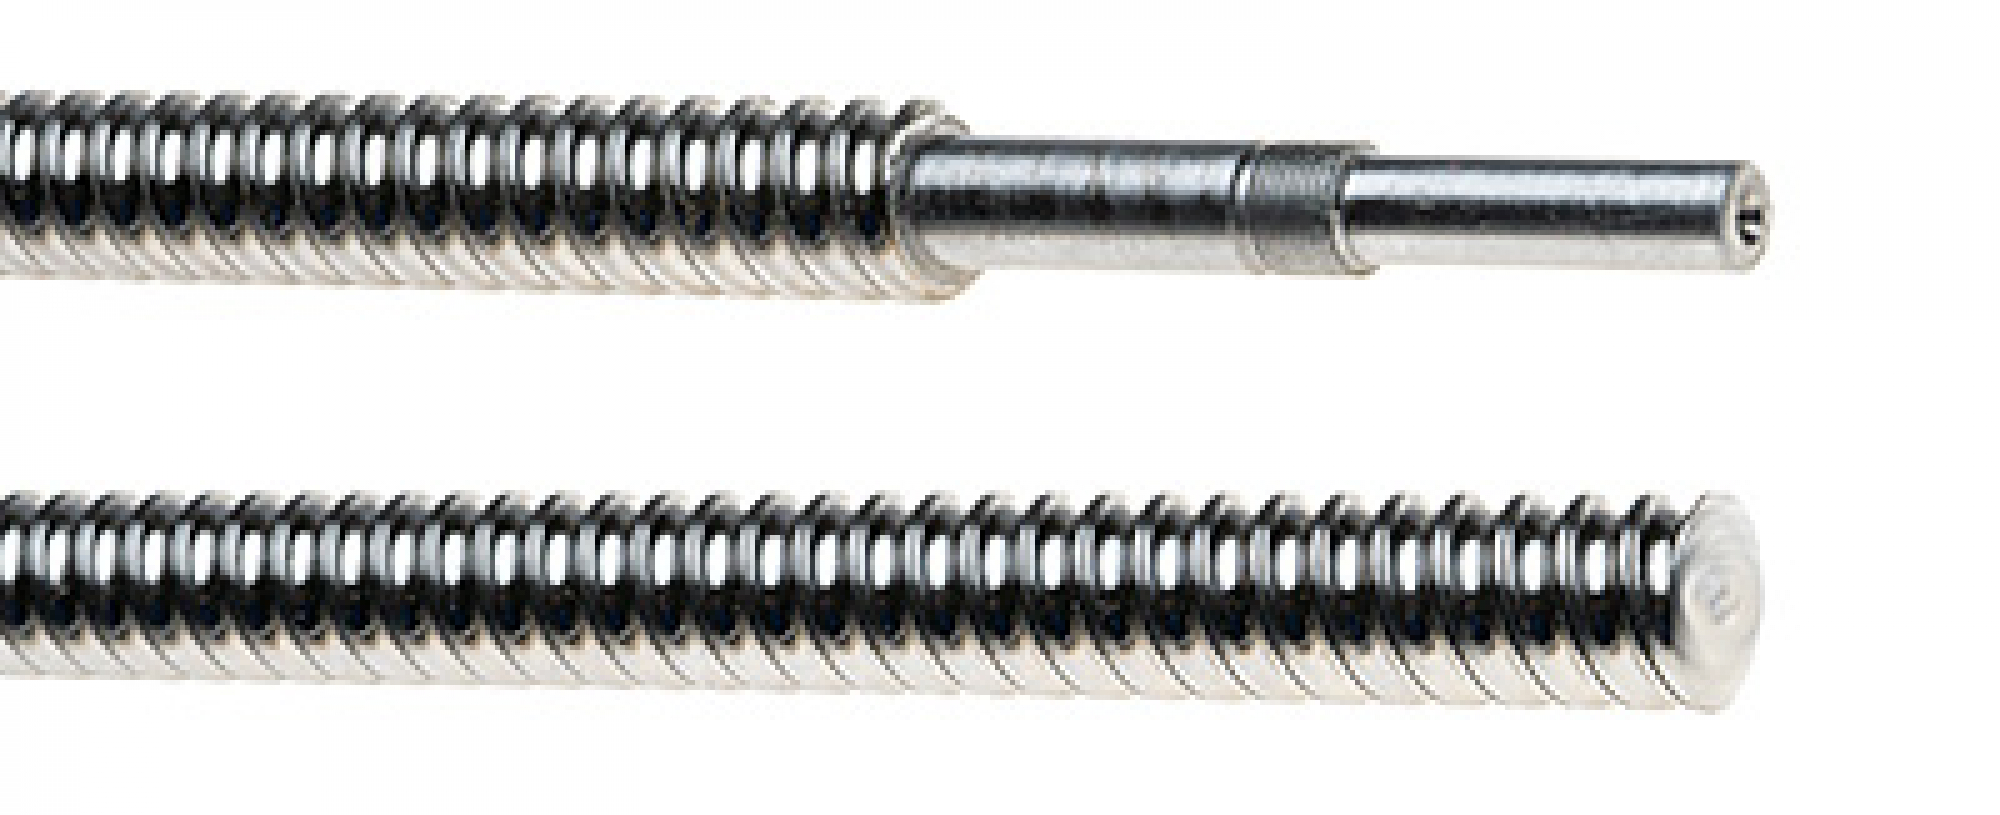 Ball screw spindle 16 x 5 Length: 381 mm, special version brake